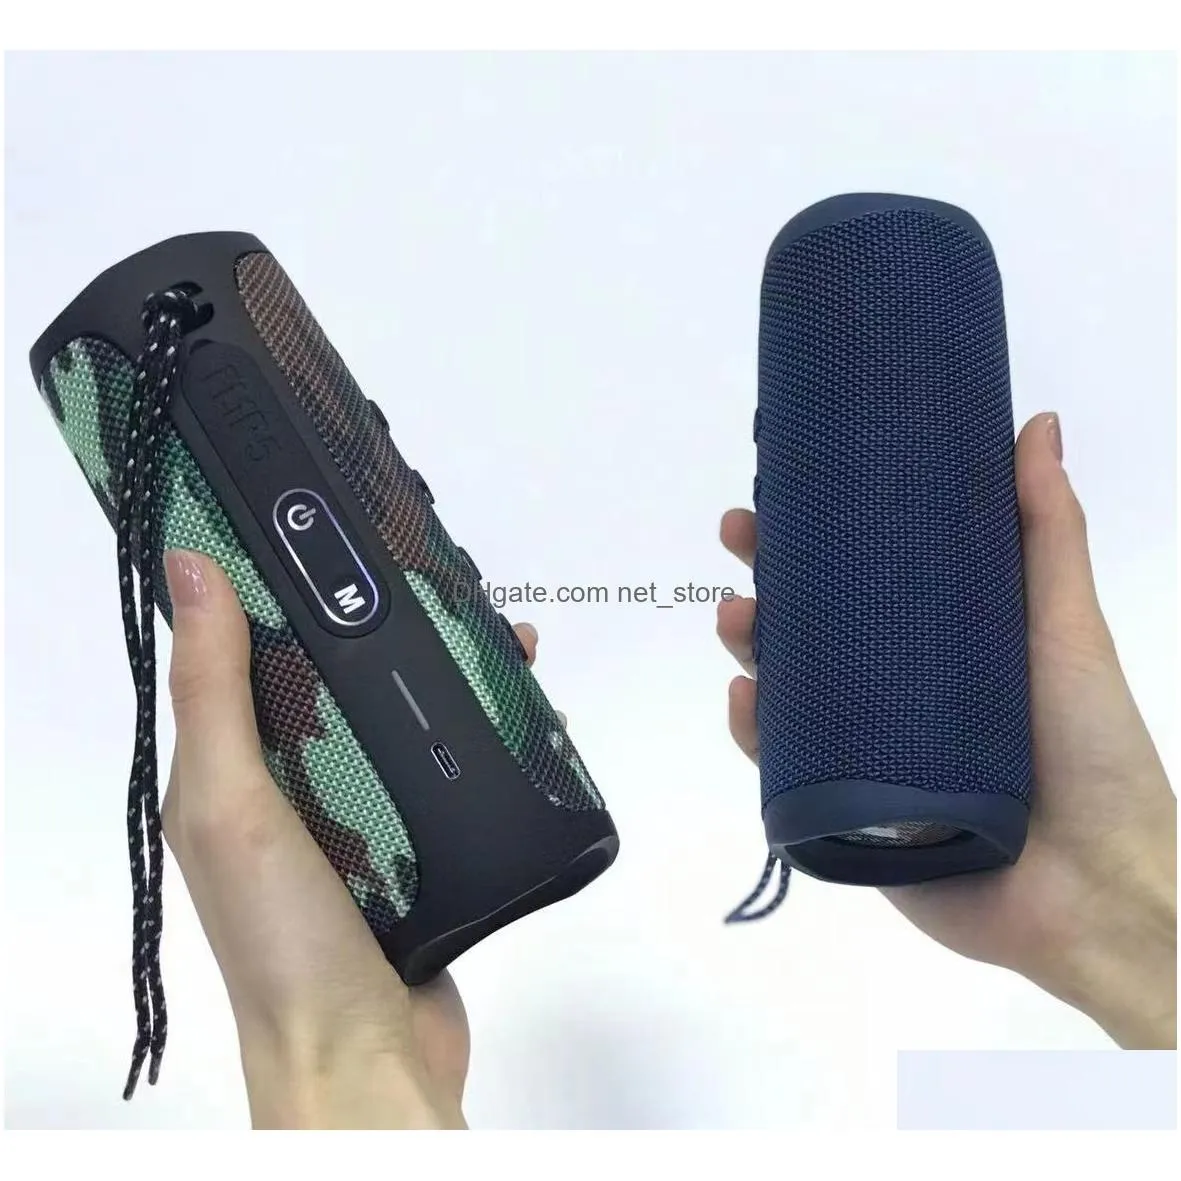 flip 5 mini wireless bluetooth speaker portable outdoor sports audio double horn speakers with retail box